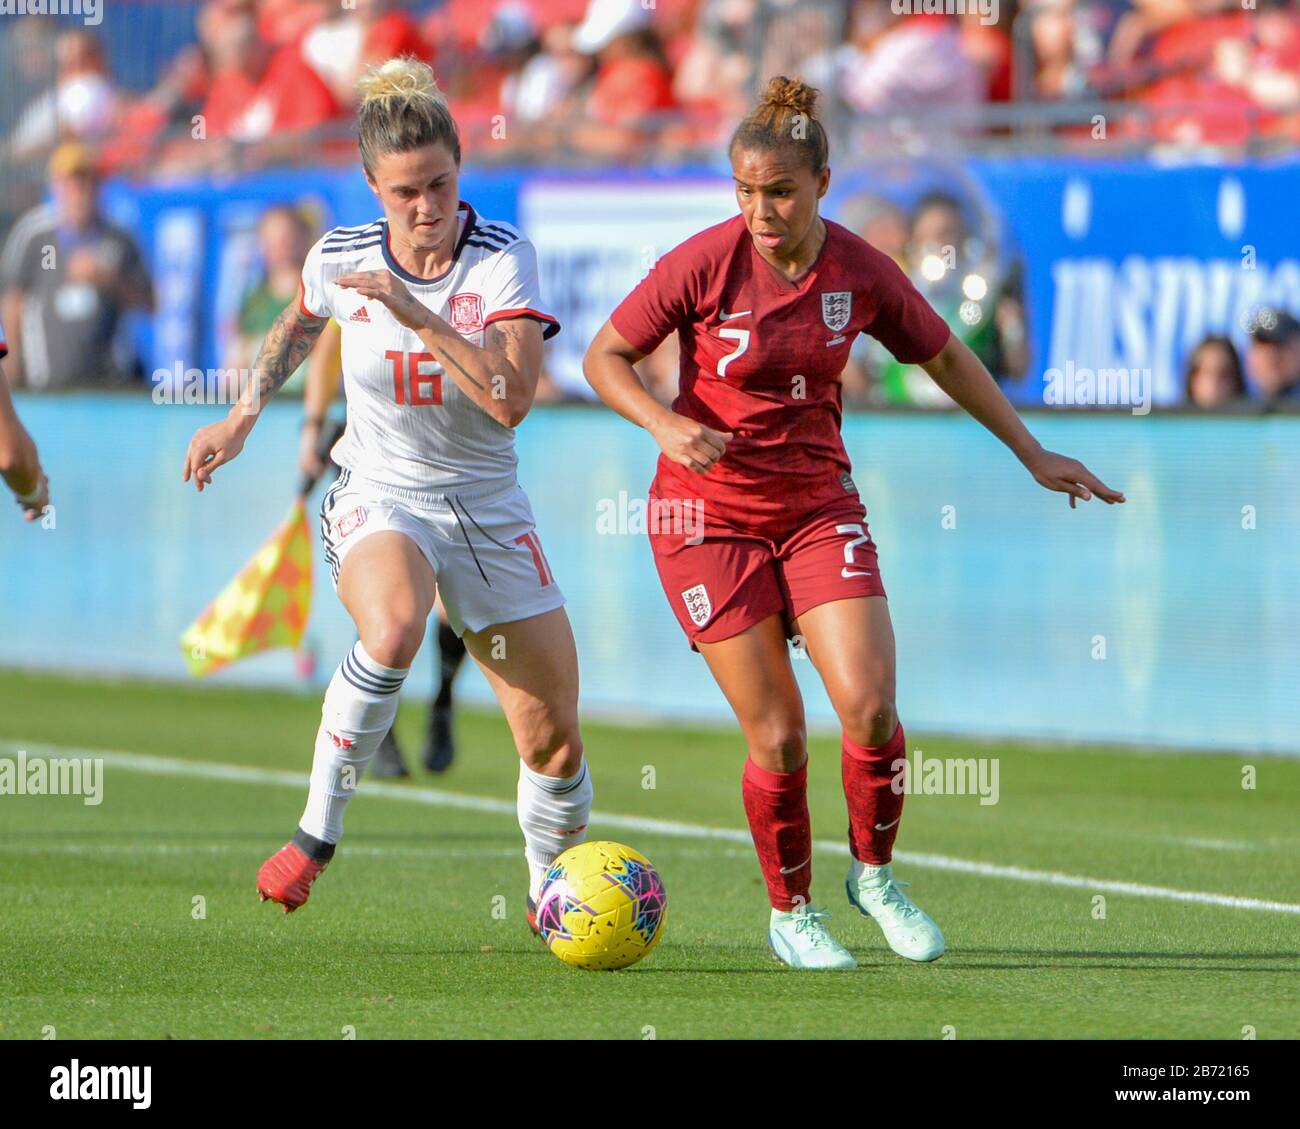 Frisco, TX, USA. 11th Mar, 2020. Spain defender, Mapi Leon (16), and England forward, Nikita Parris (7), in action during the SheBelieves Cup match between England and Spain, at Toyota Stadium in Frisco, TX. Kevin Langley/CSM/Alamy Live News Stock Photo